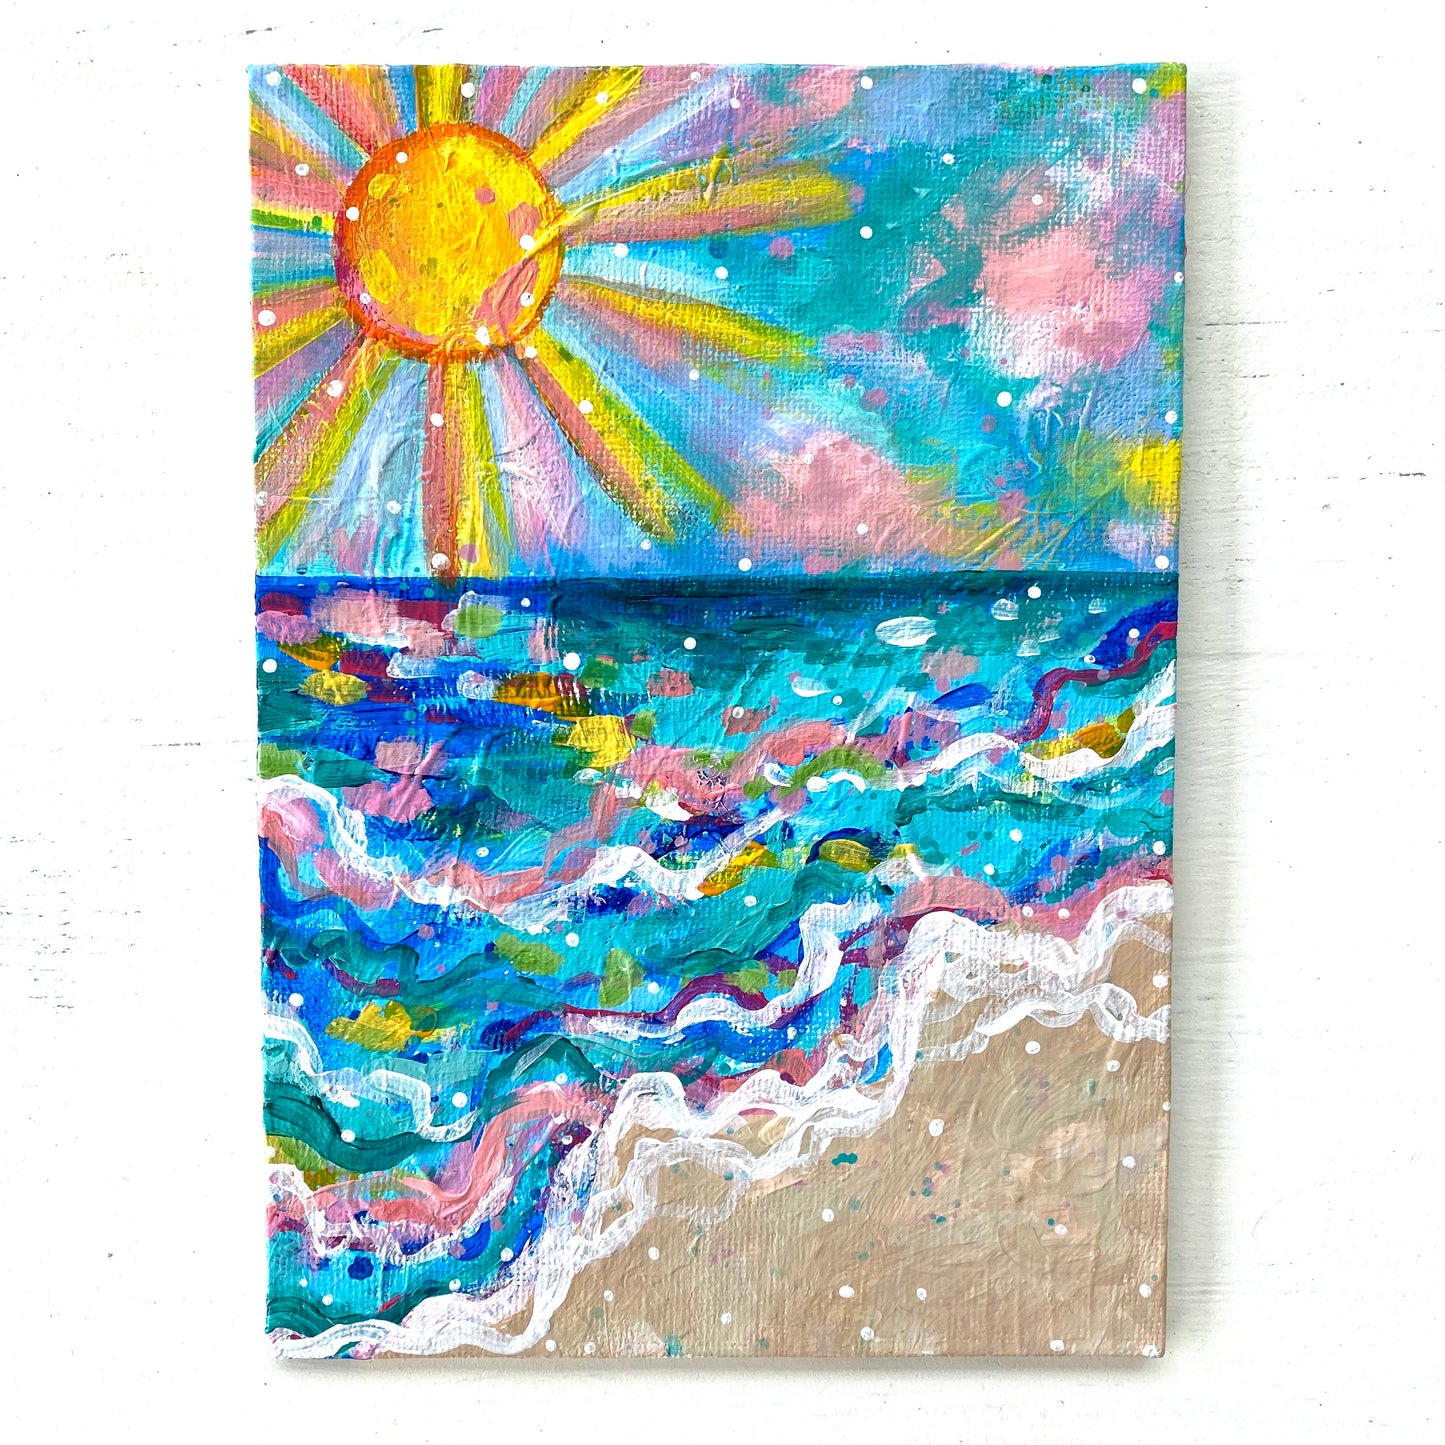 August 2020 Daily Painting Day 20 “Sun, Sand, the Sea, and Me” 5x7 inch original